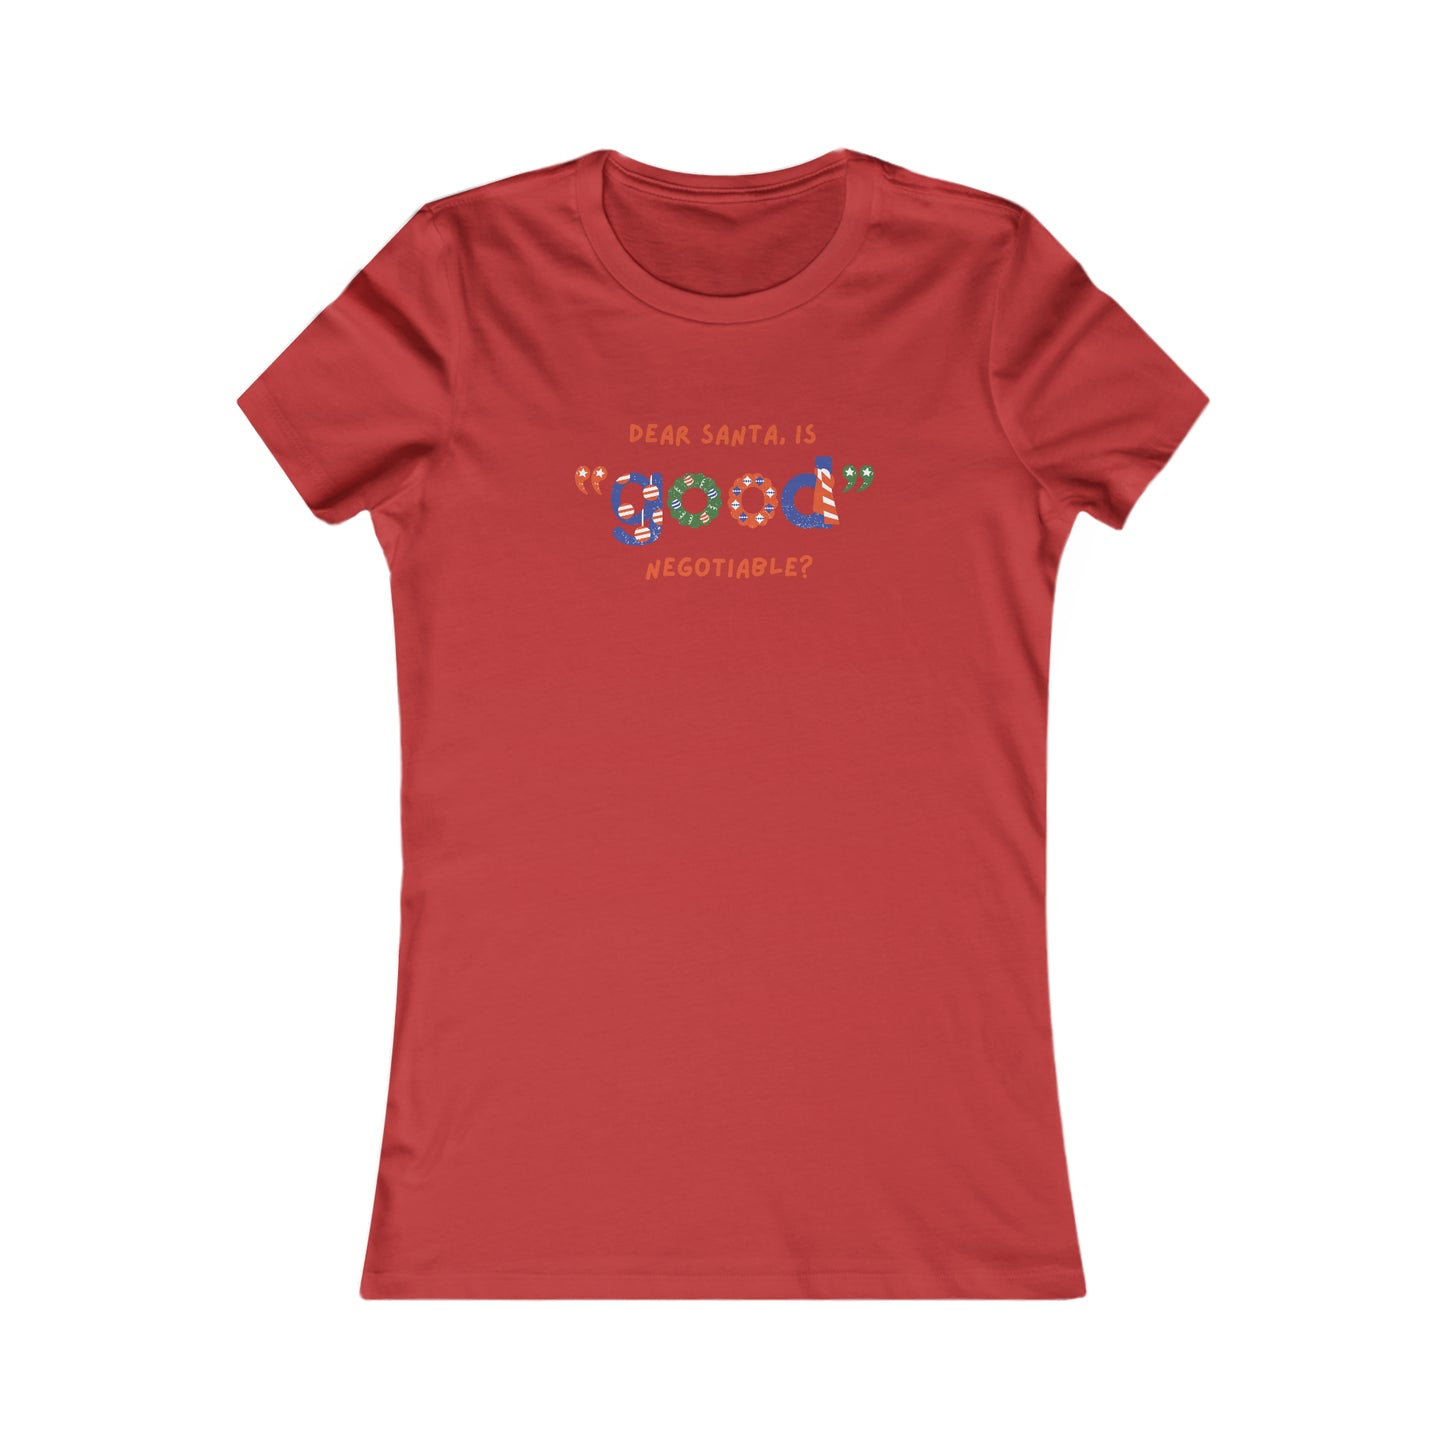 Is Good Negotiable T-shirt